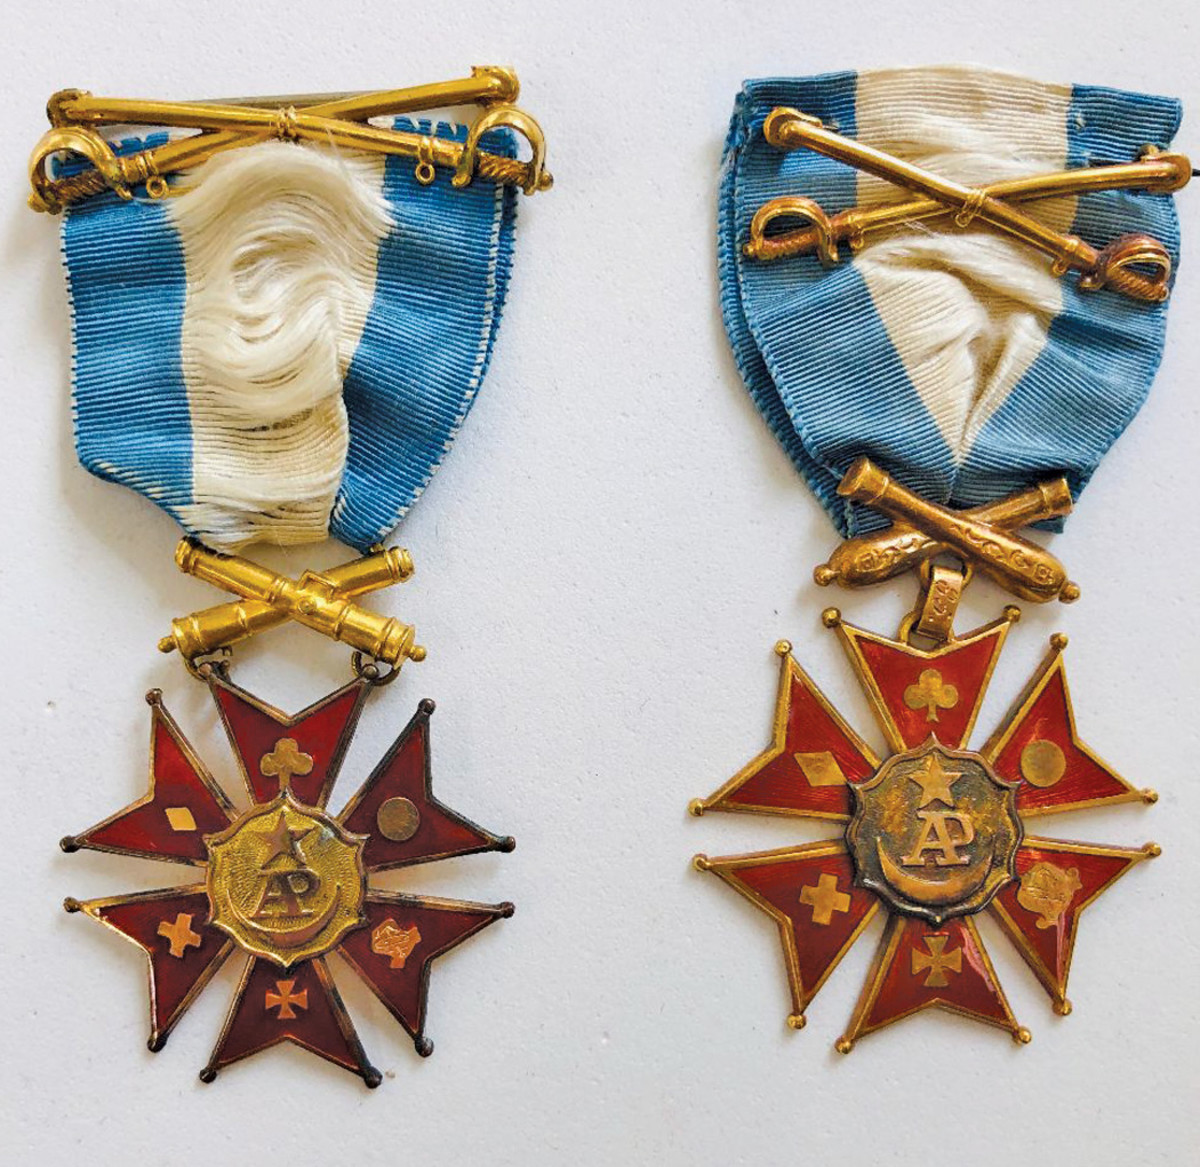 Two examples of the Society of the Army of the Potomac membership medal show slight variations in size as well as suspension.